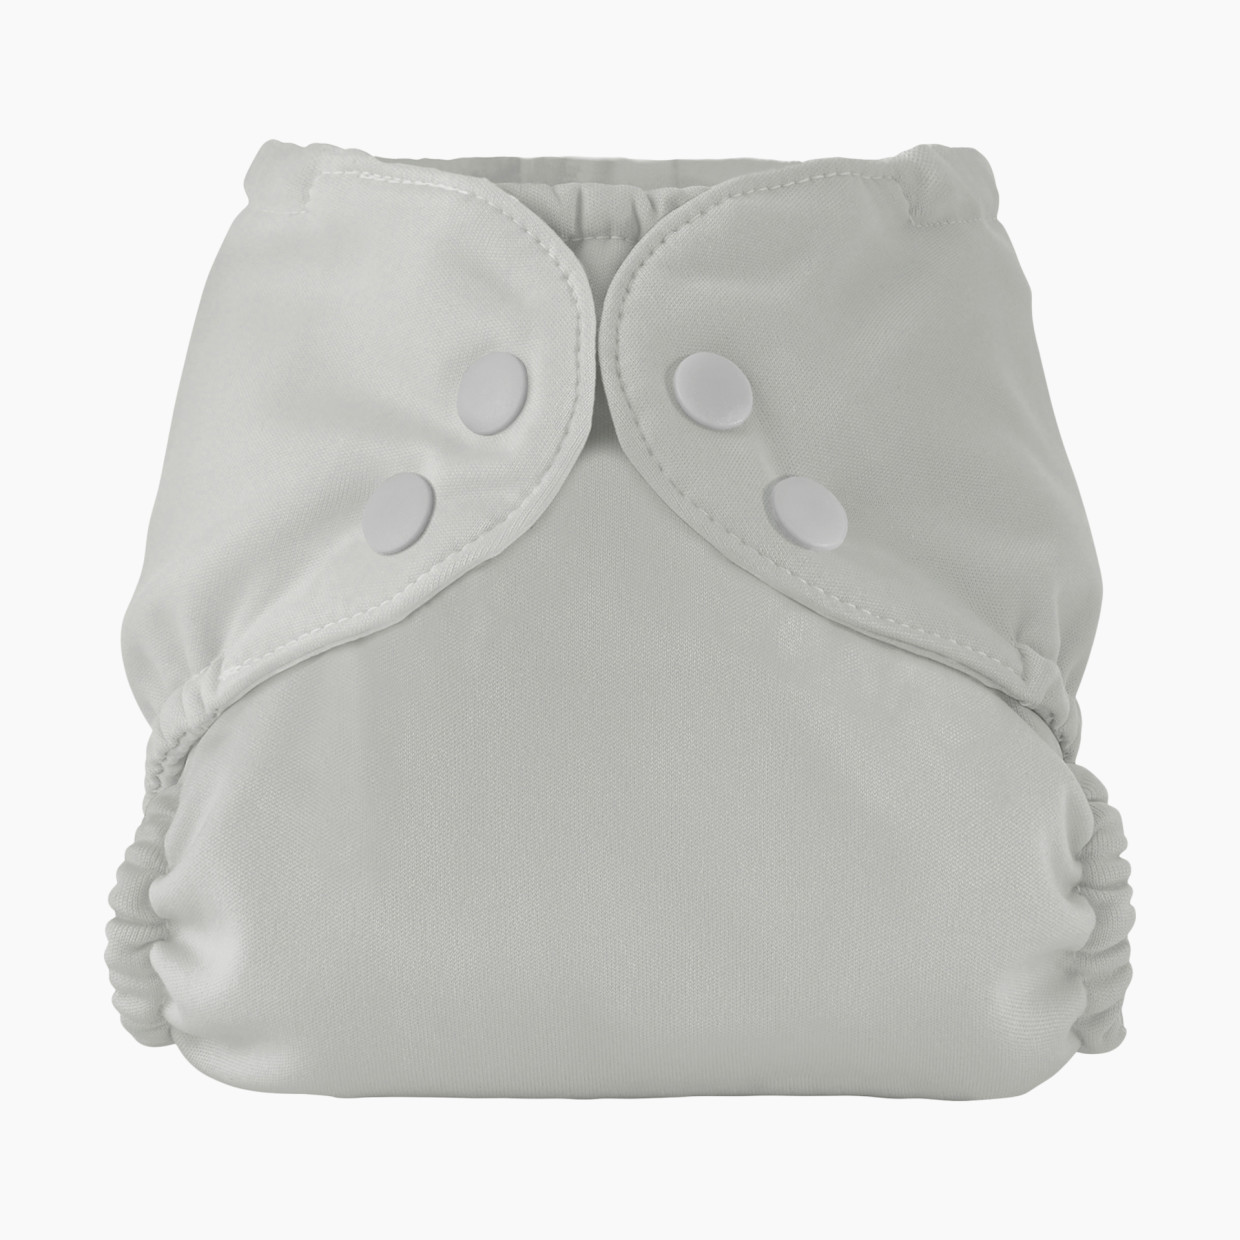 Esembly Recycled Diaper Cover (Outer) + Swim Diaper - Dove, Size 1 (7-17 Lbs).